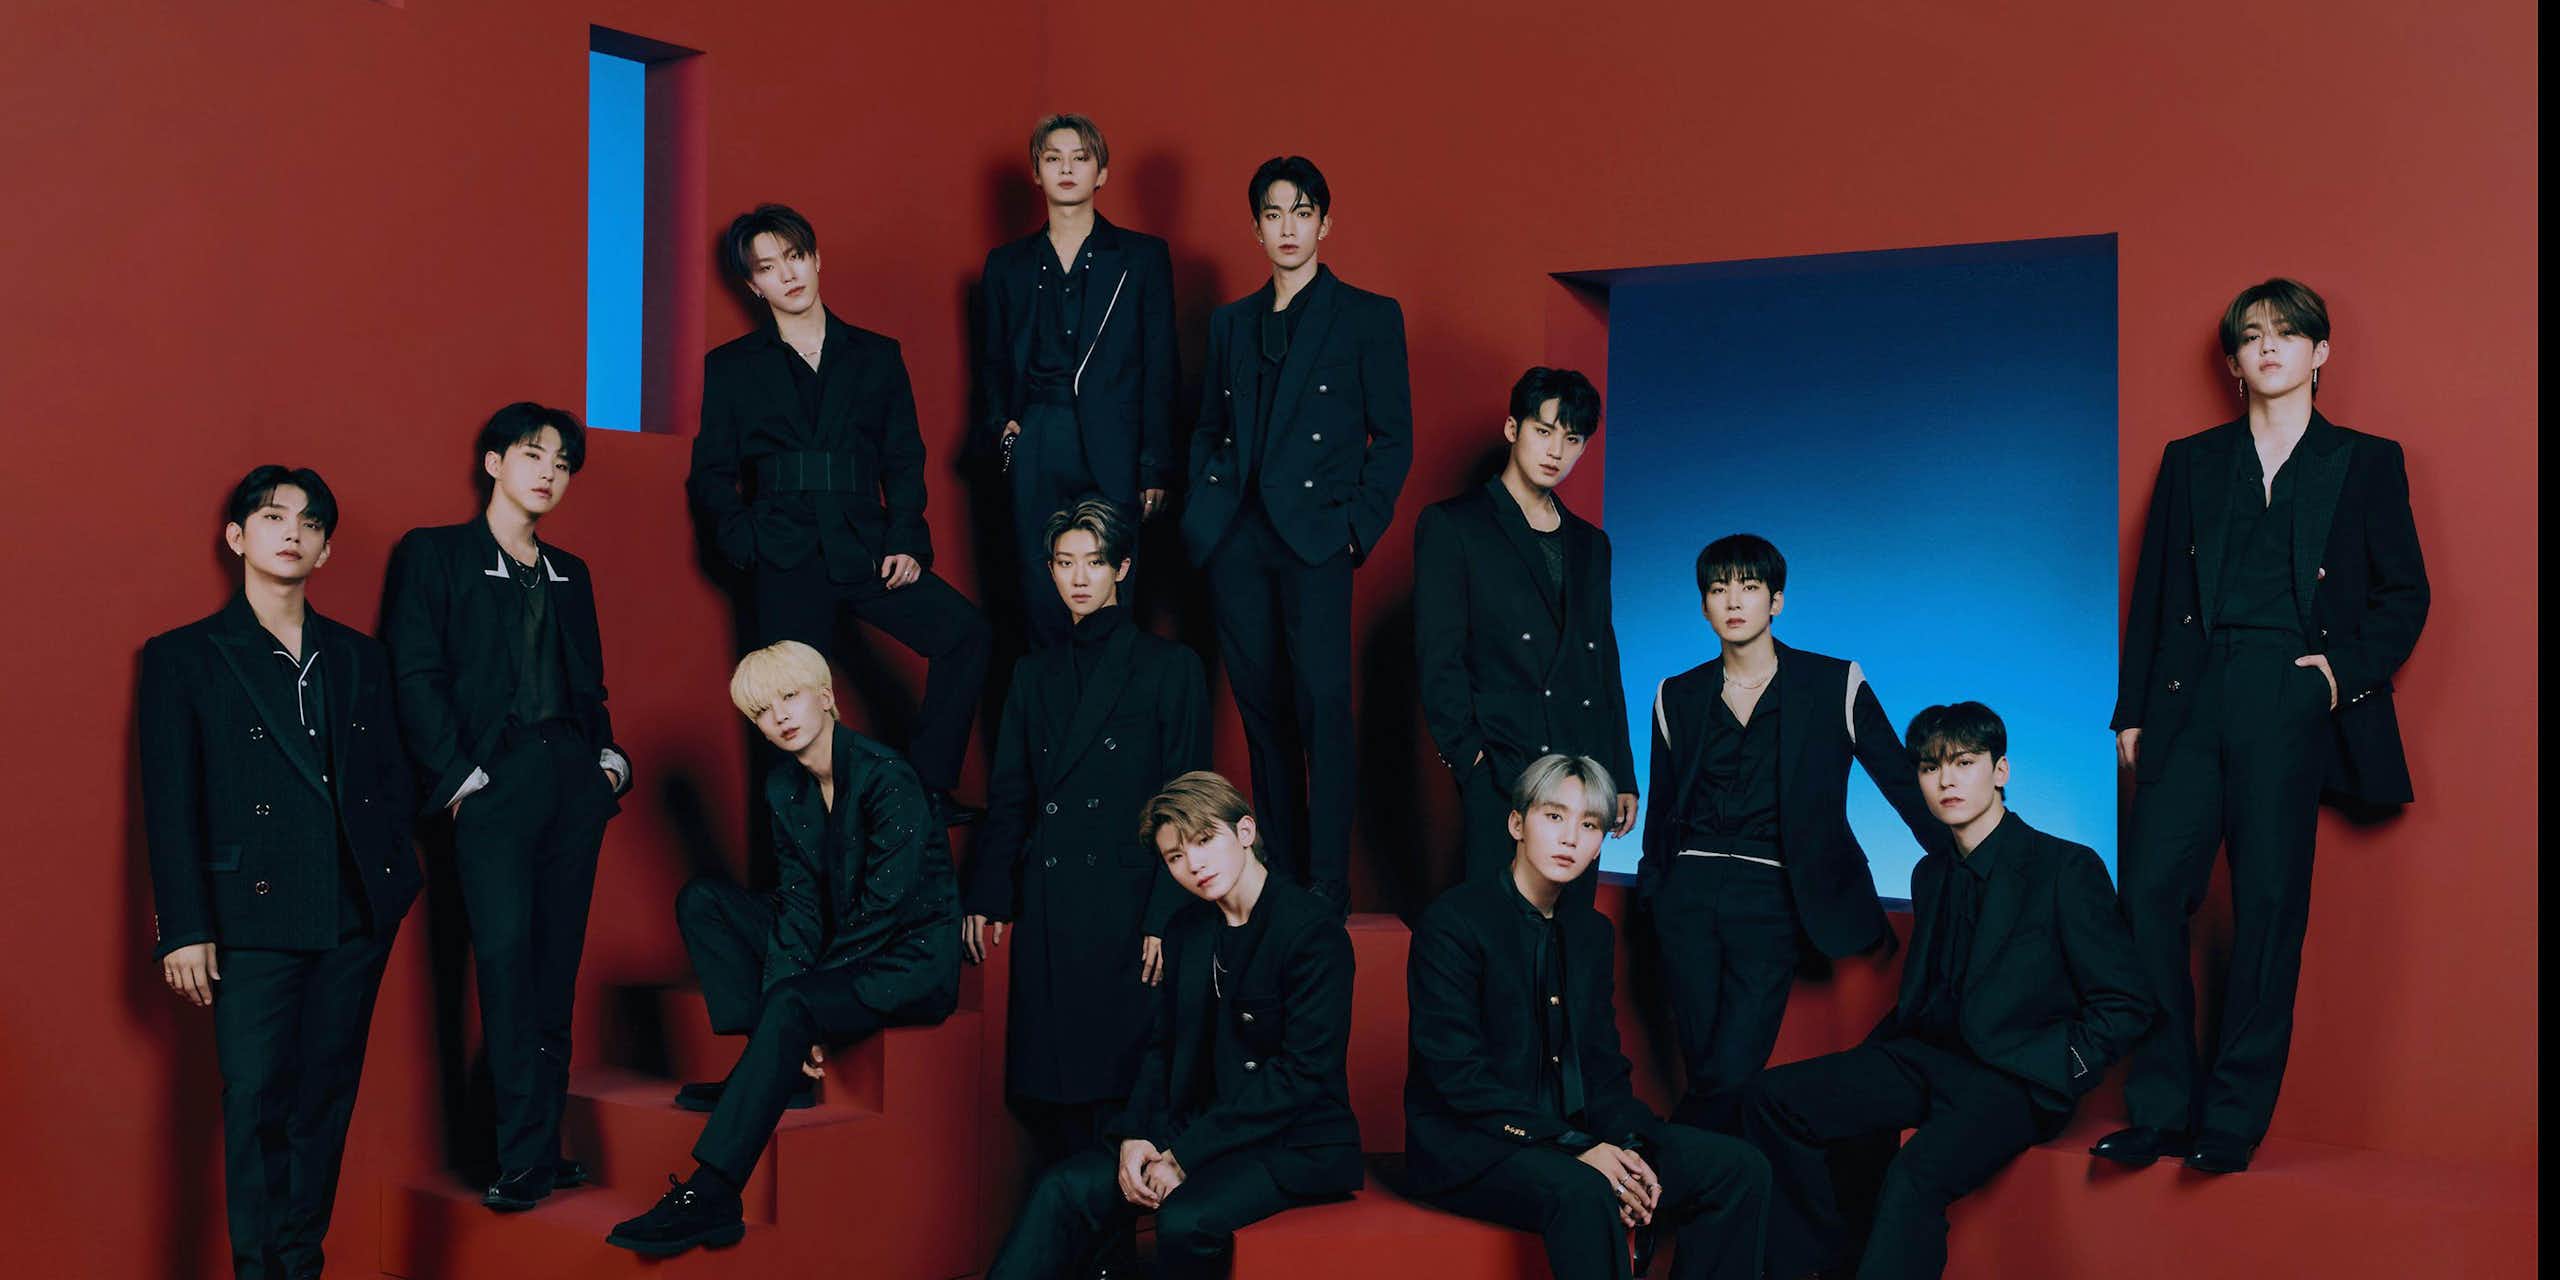 The 17 members of the K-pop band SEVENTEEN.